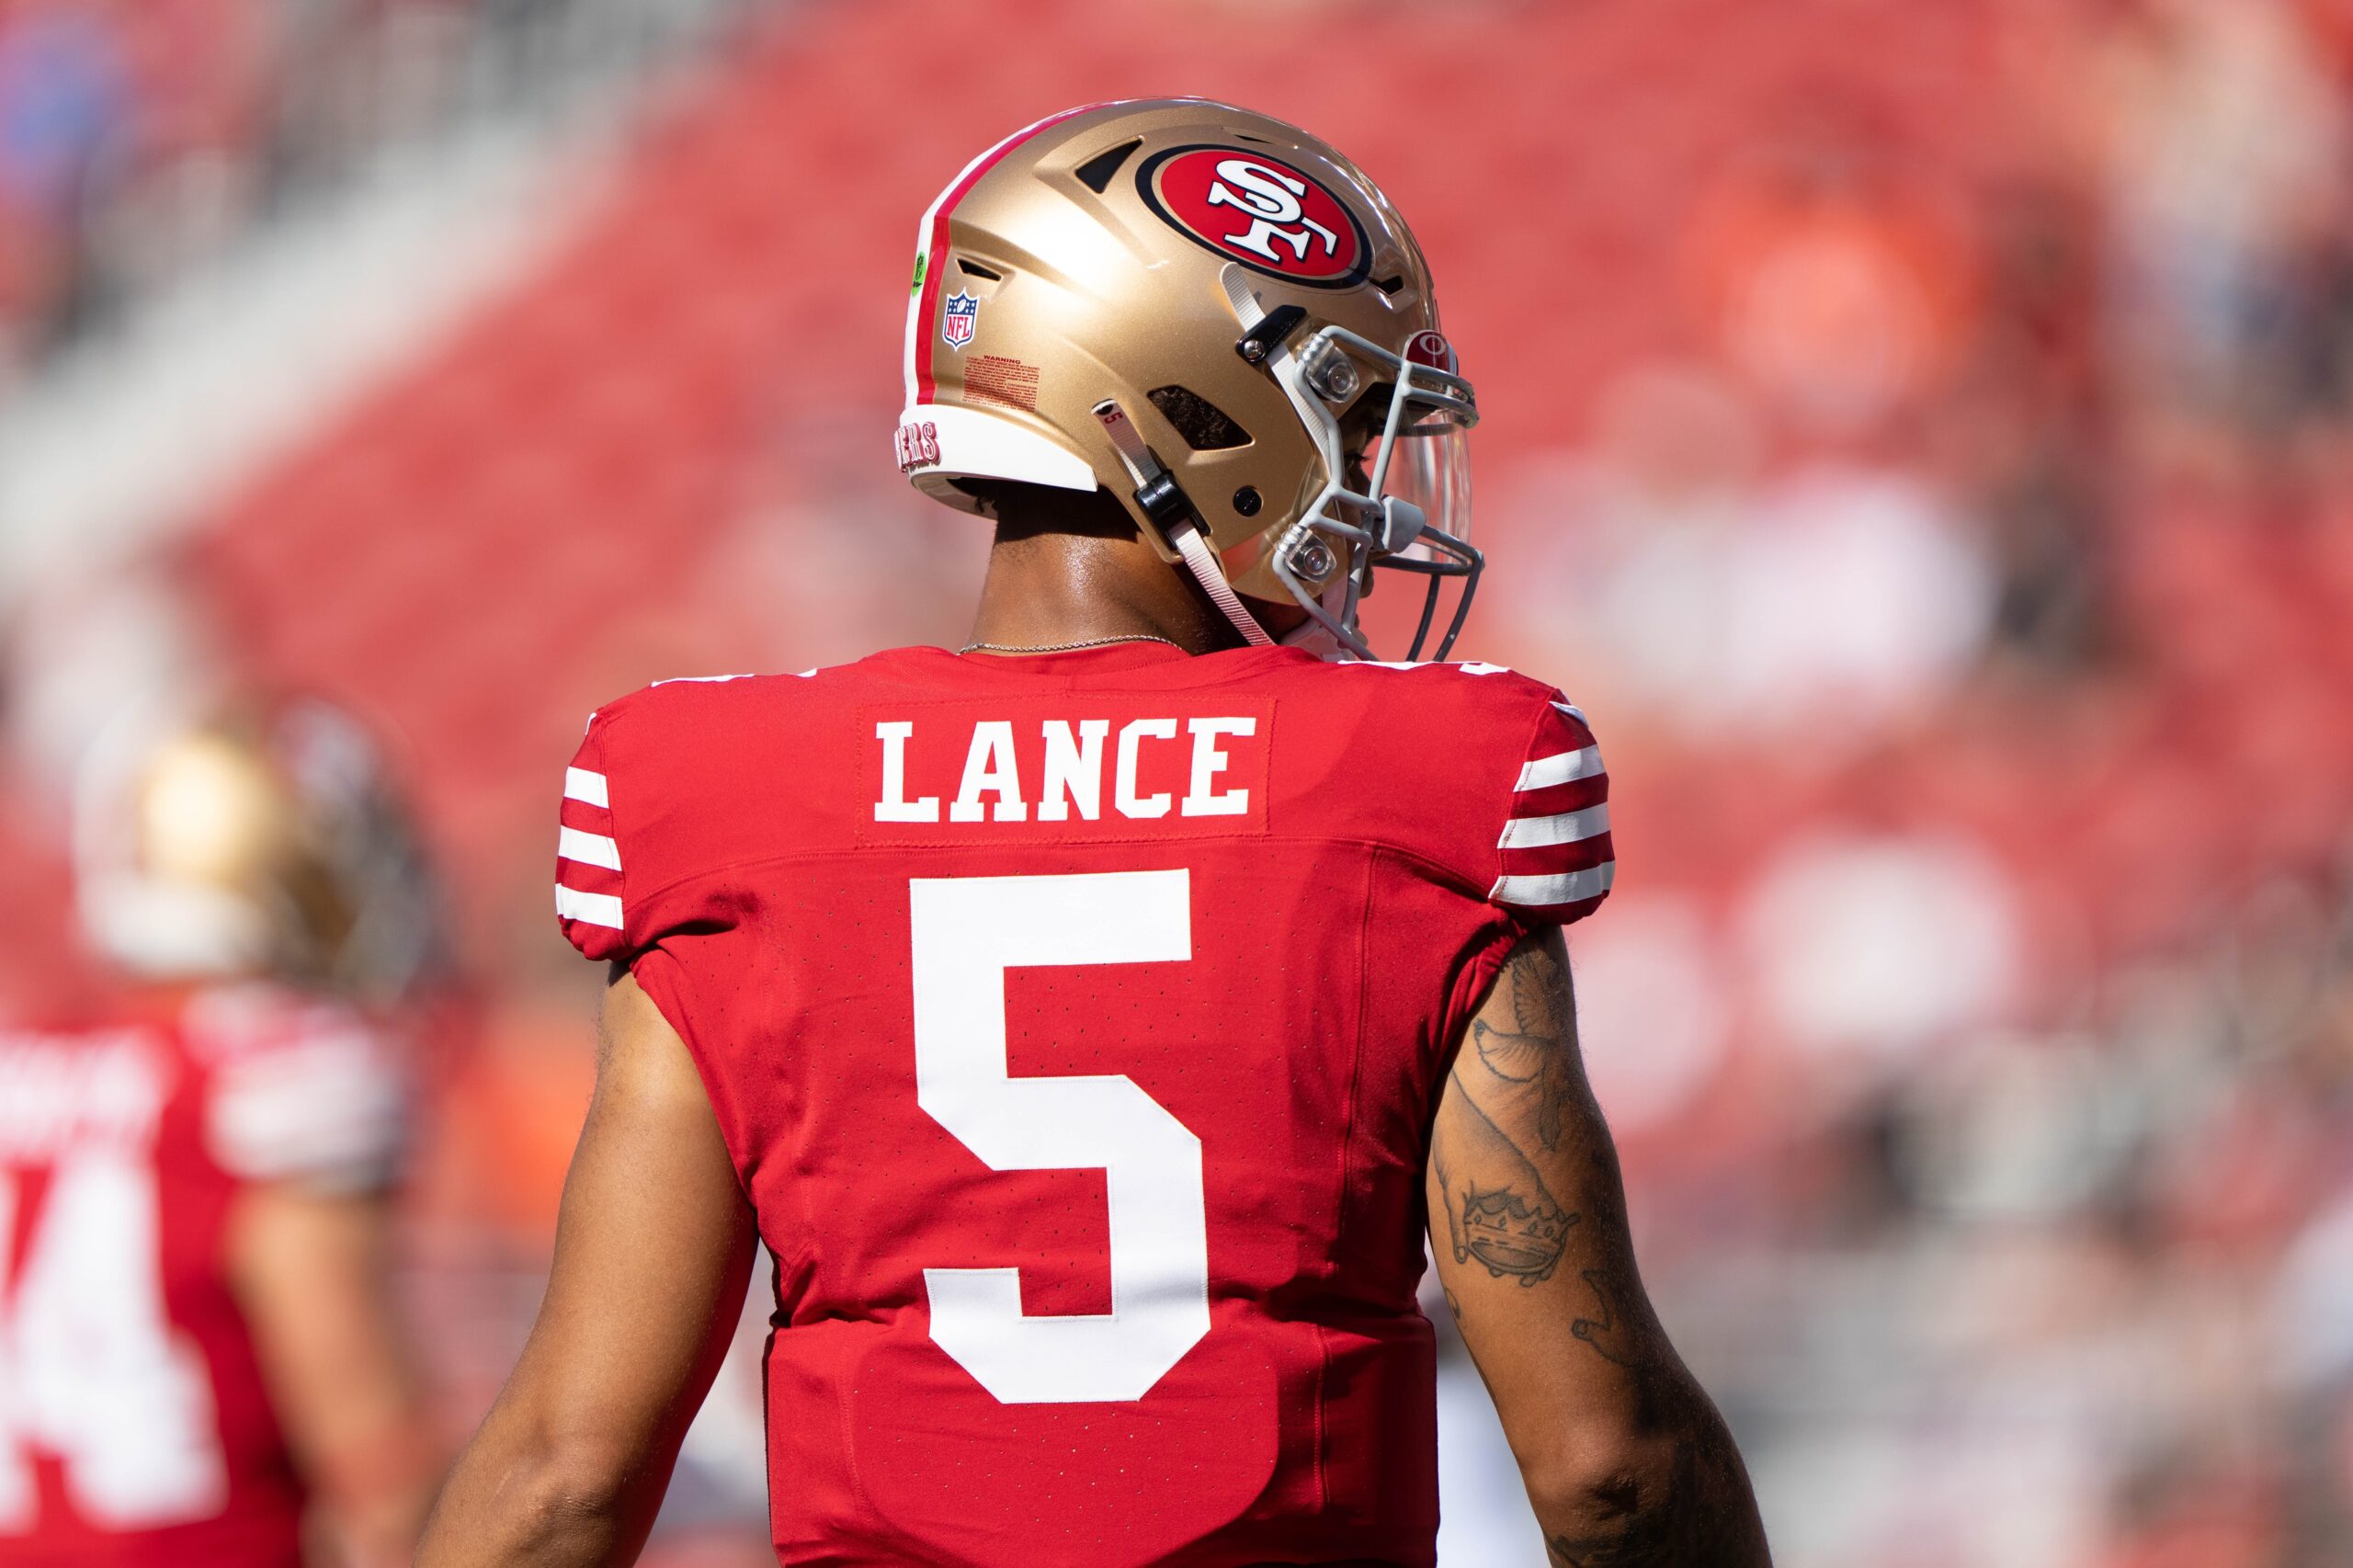 49ers Select QB Trey Lance with the No. 3 Pick in the 2021 NFL Draft